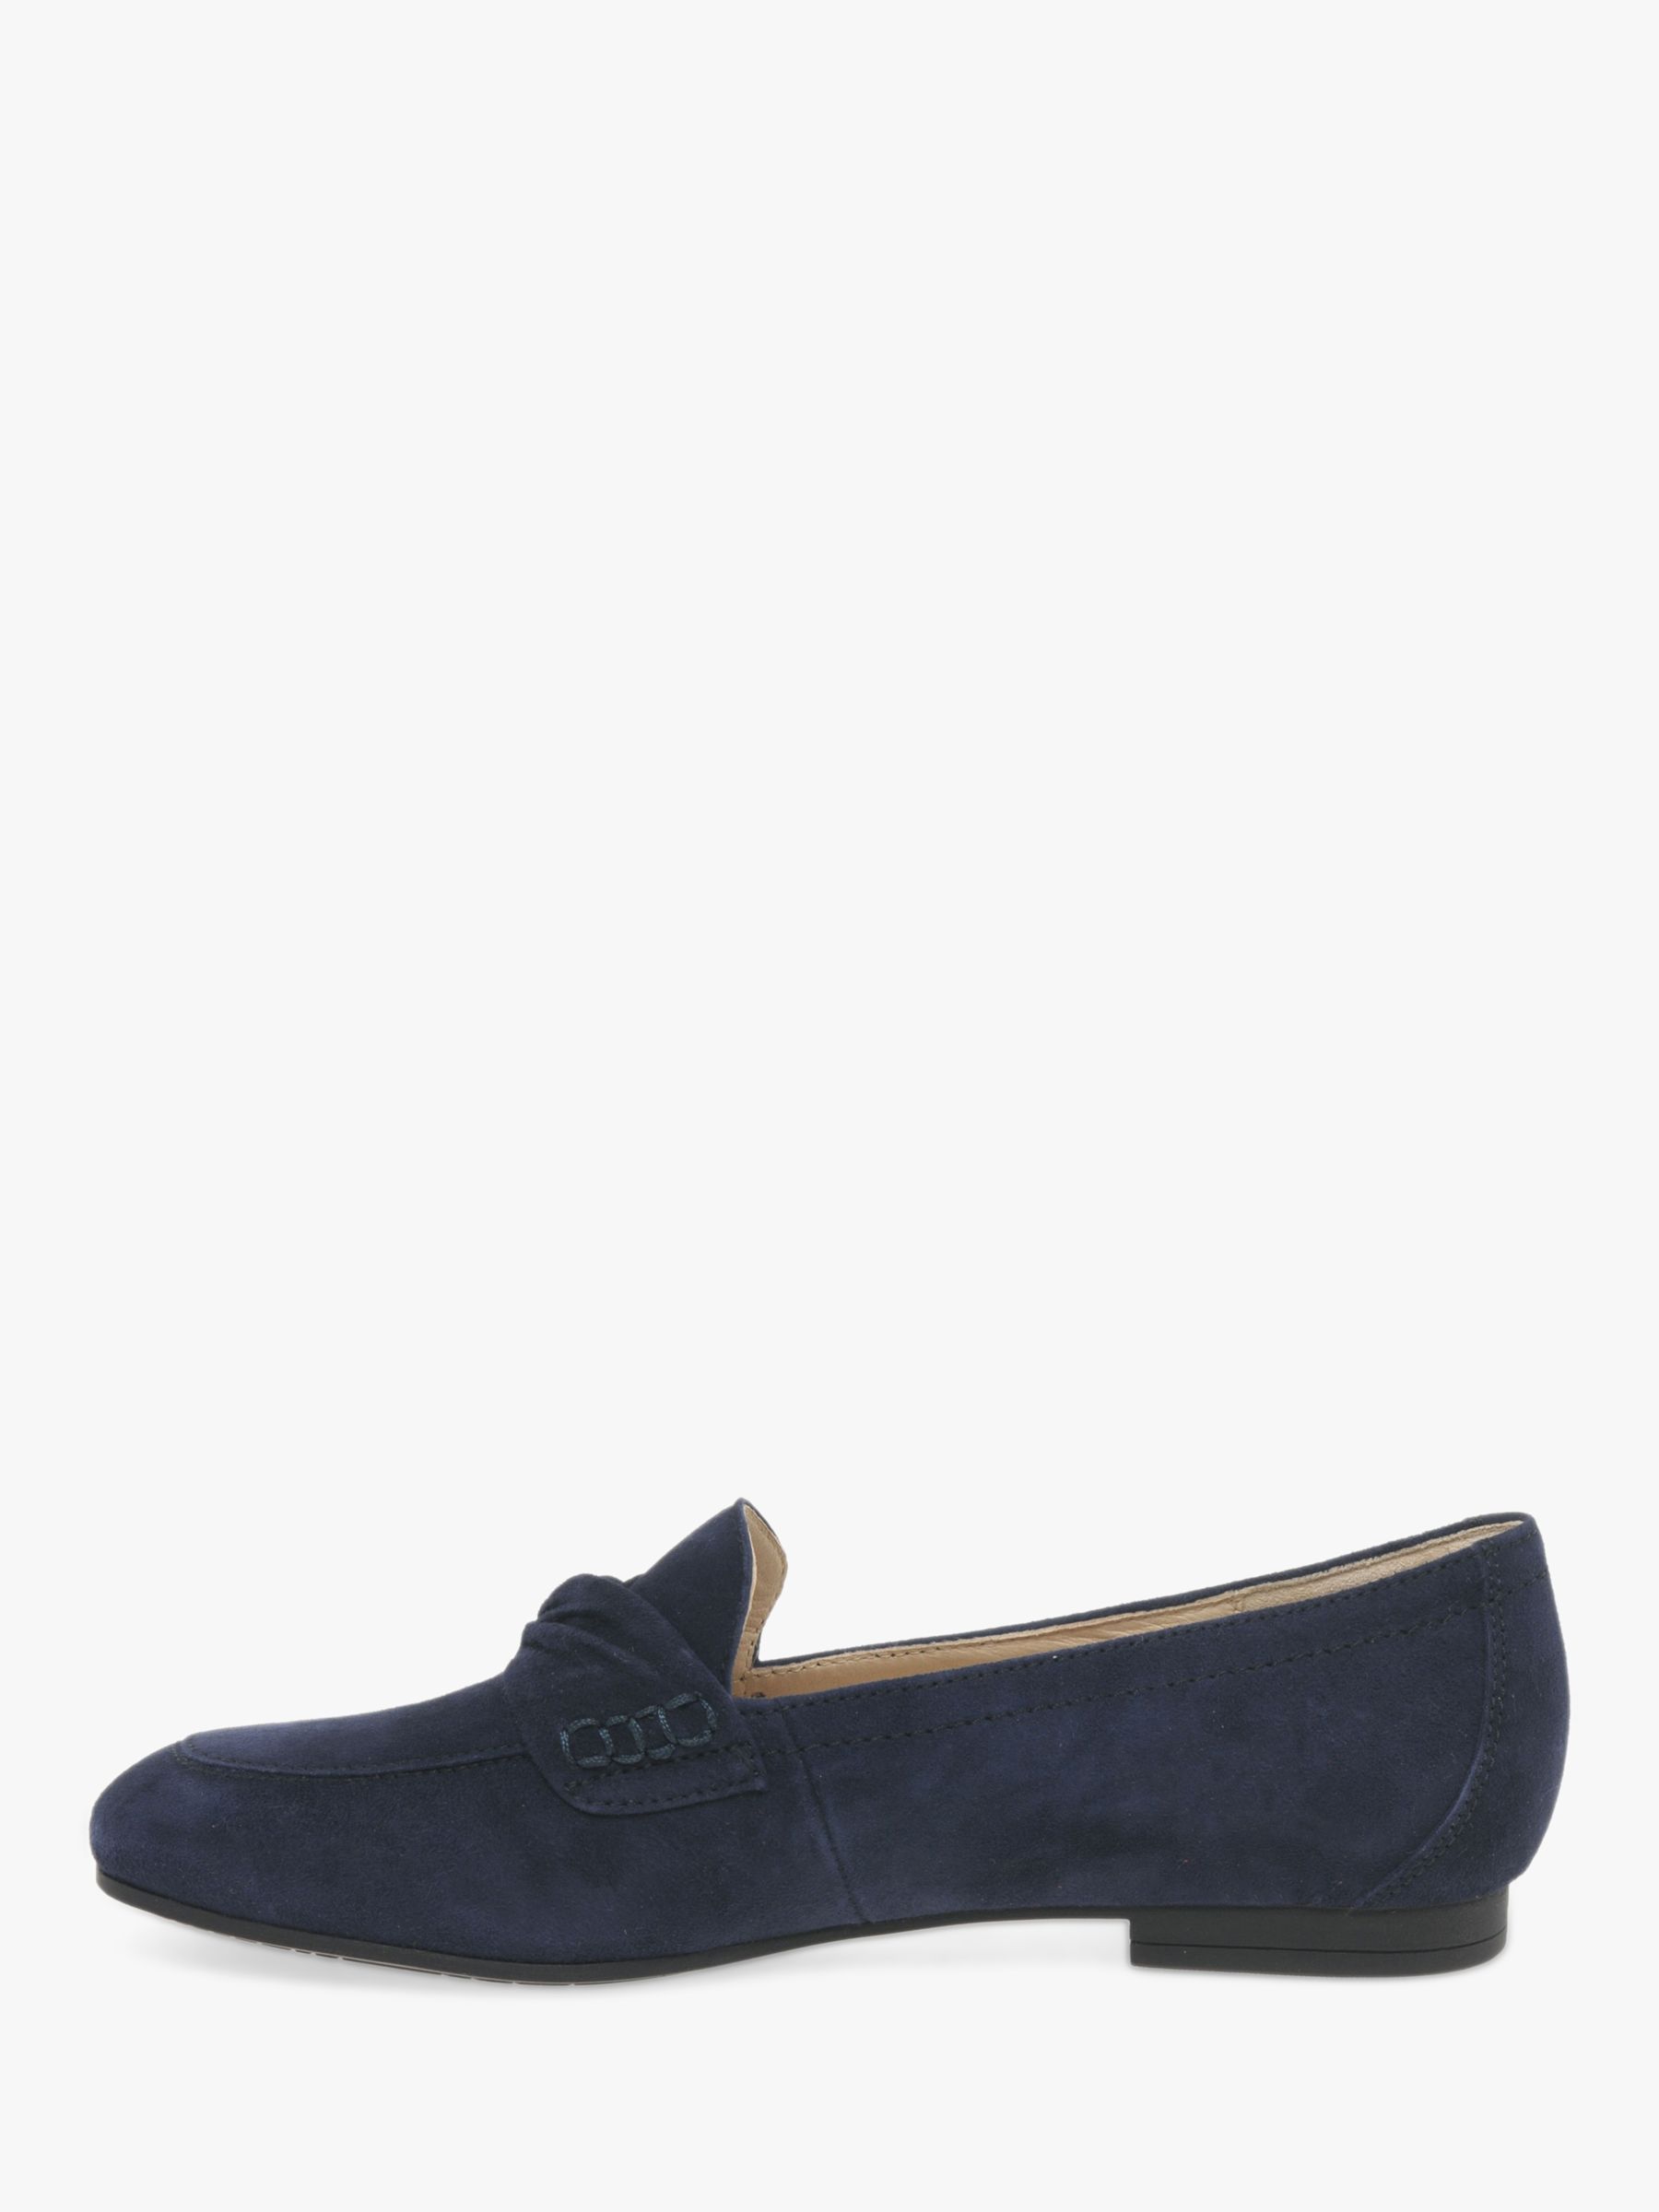 Gabor Mendoza Loafers, Navy Suede at John Lewis & Partners